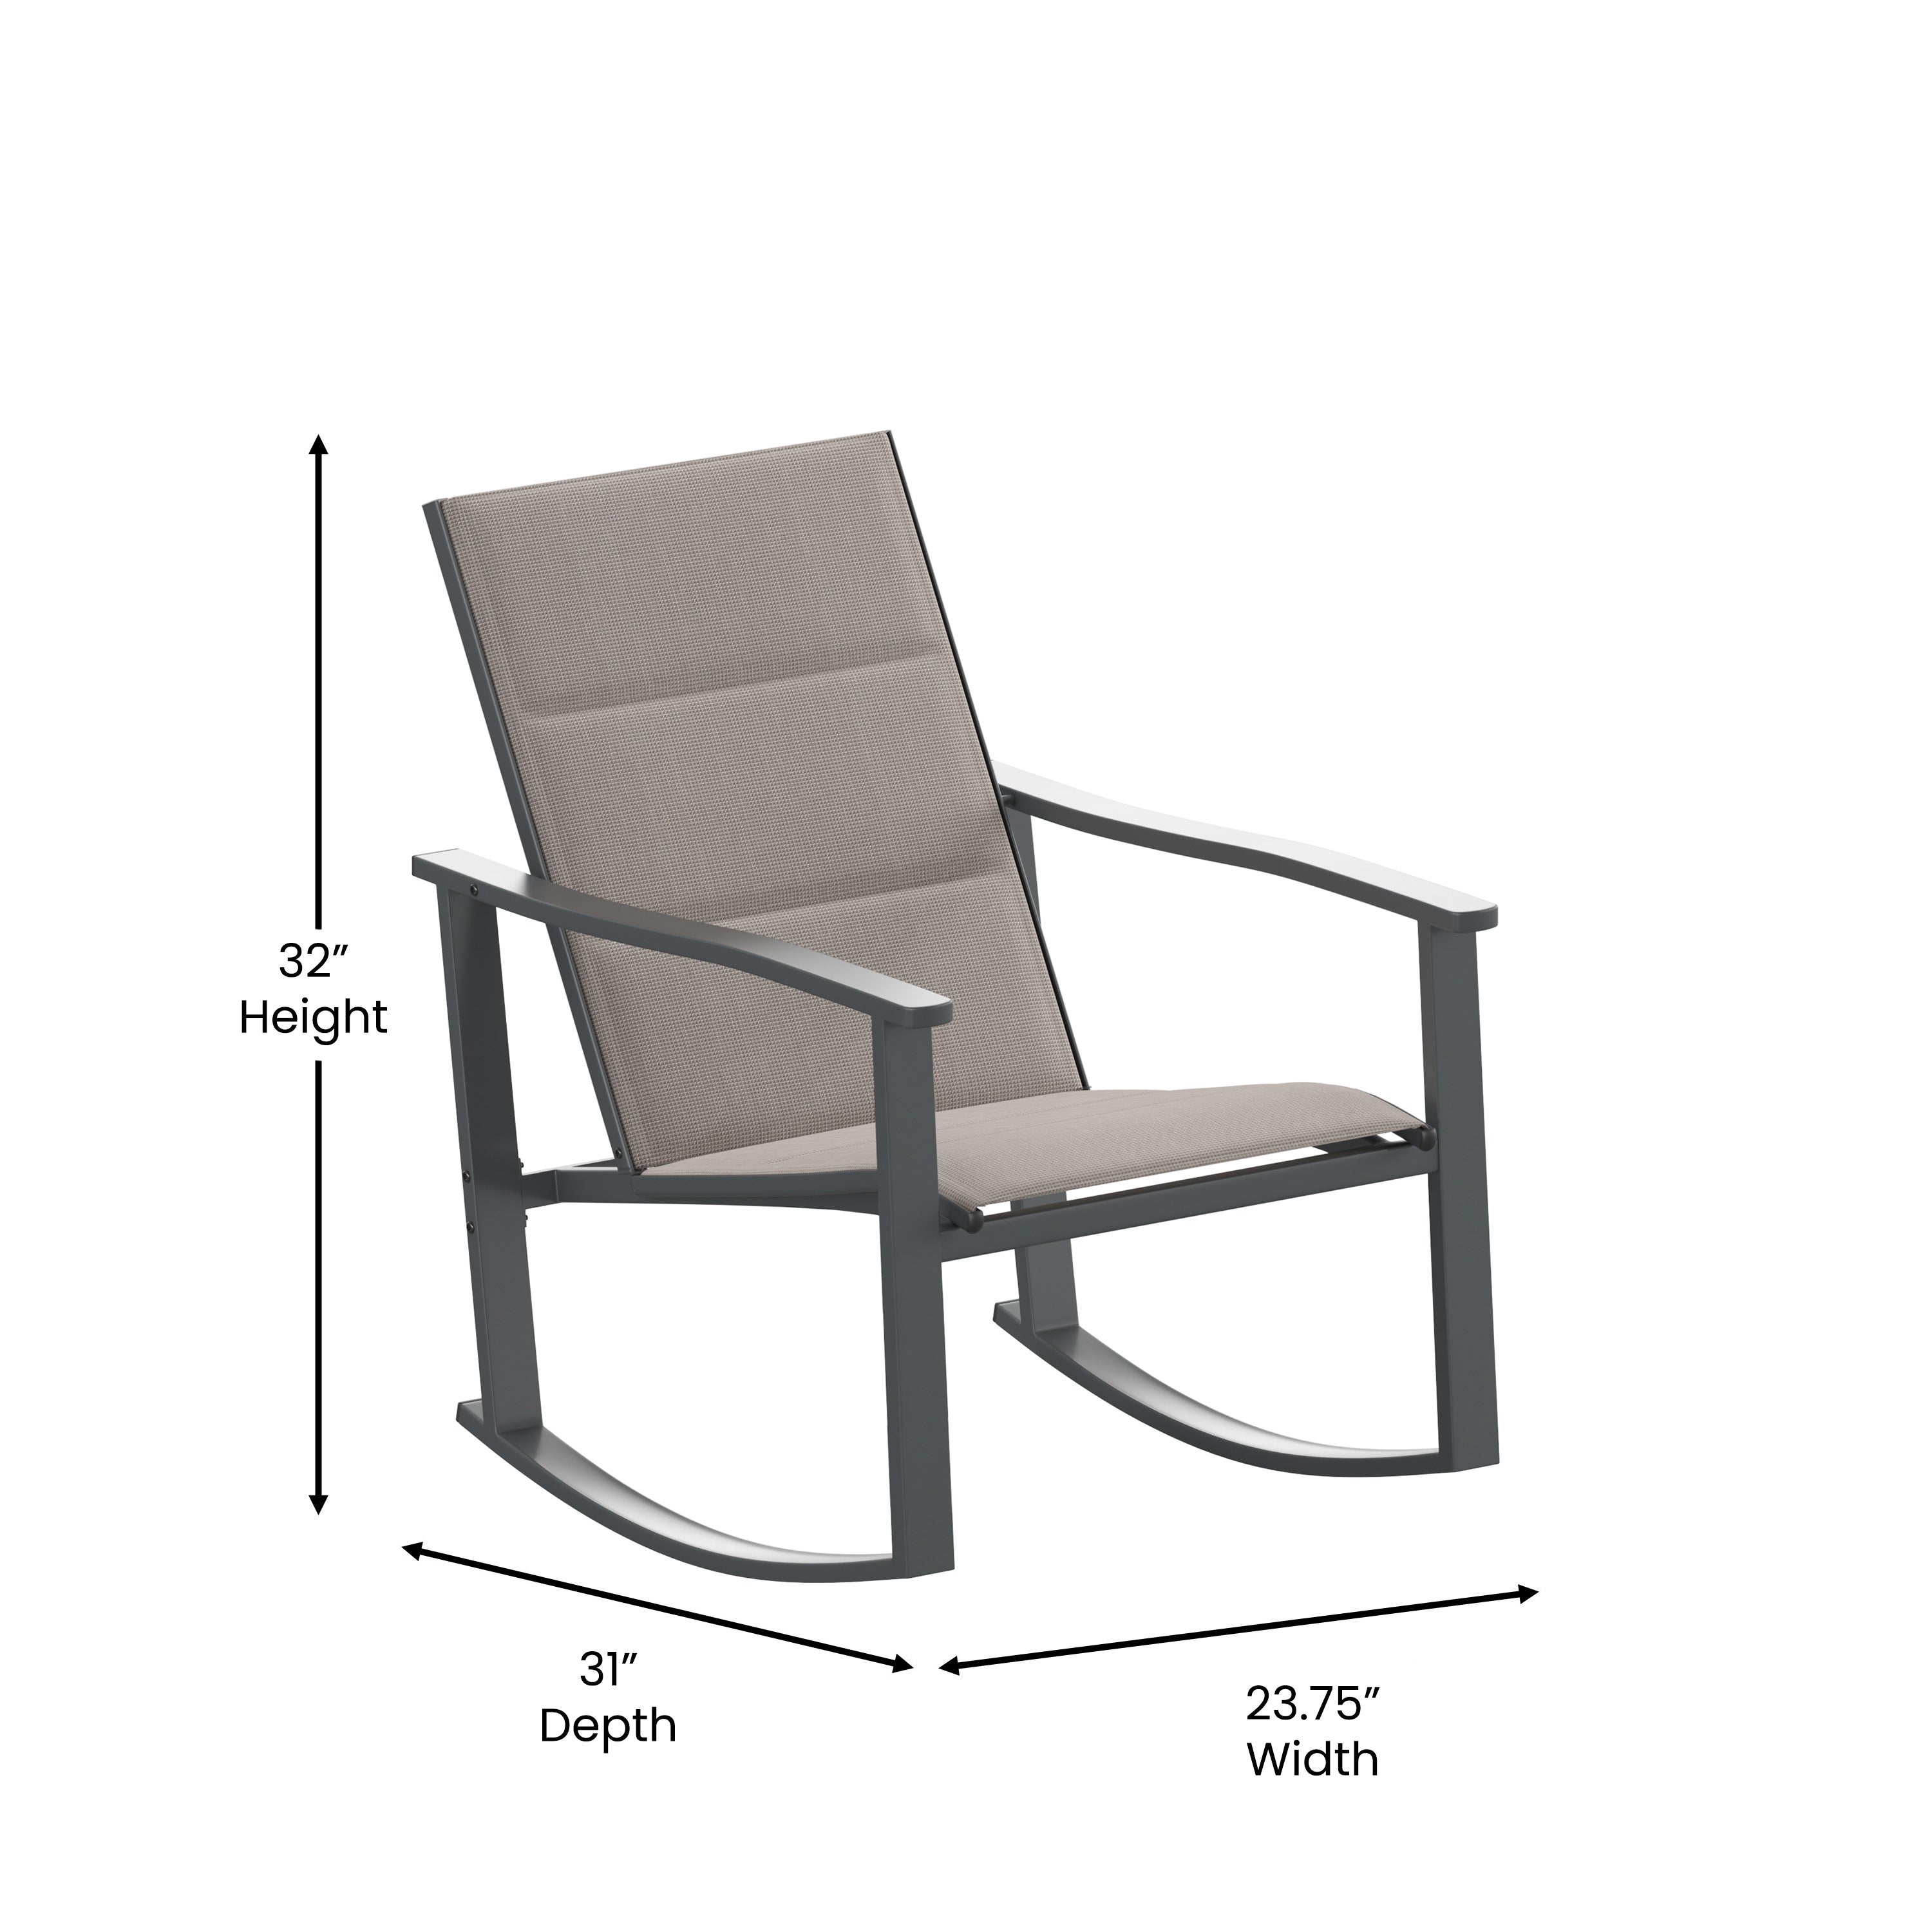 Brazos Set of 2 Outdoor Rocking Chairs with Flex Comfort Material and Metal Frame-Metal Patio Rocking Chair-Flash Furniture-Wall2Wall Furnishings